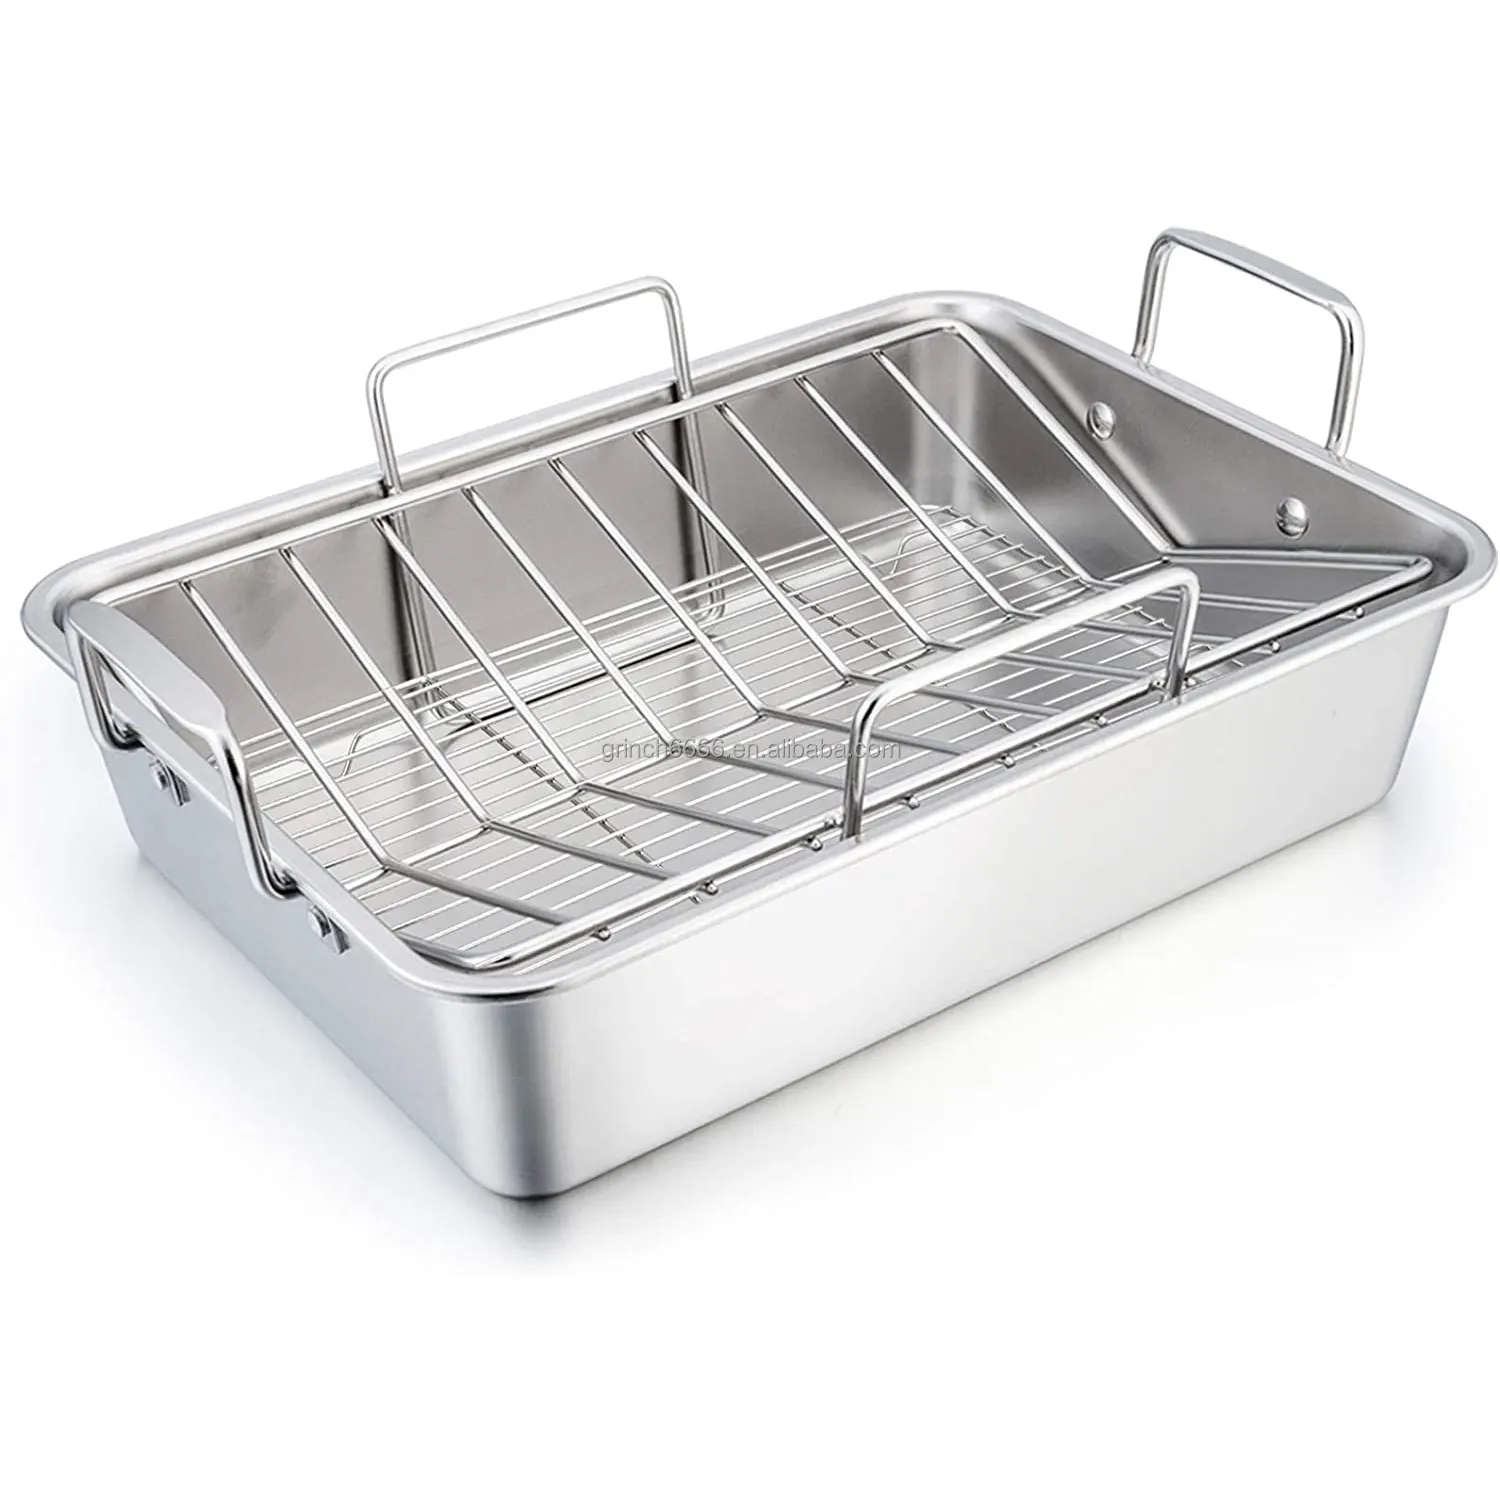 Roasting Pan 15 Inch Large Turkey Roaster Lasagna Pan with V Rack & Cooling Rack Set Stainless Steel For Thanksgiving Christmas